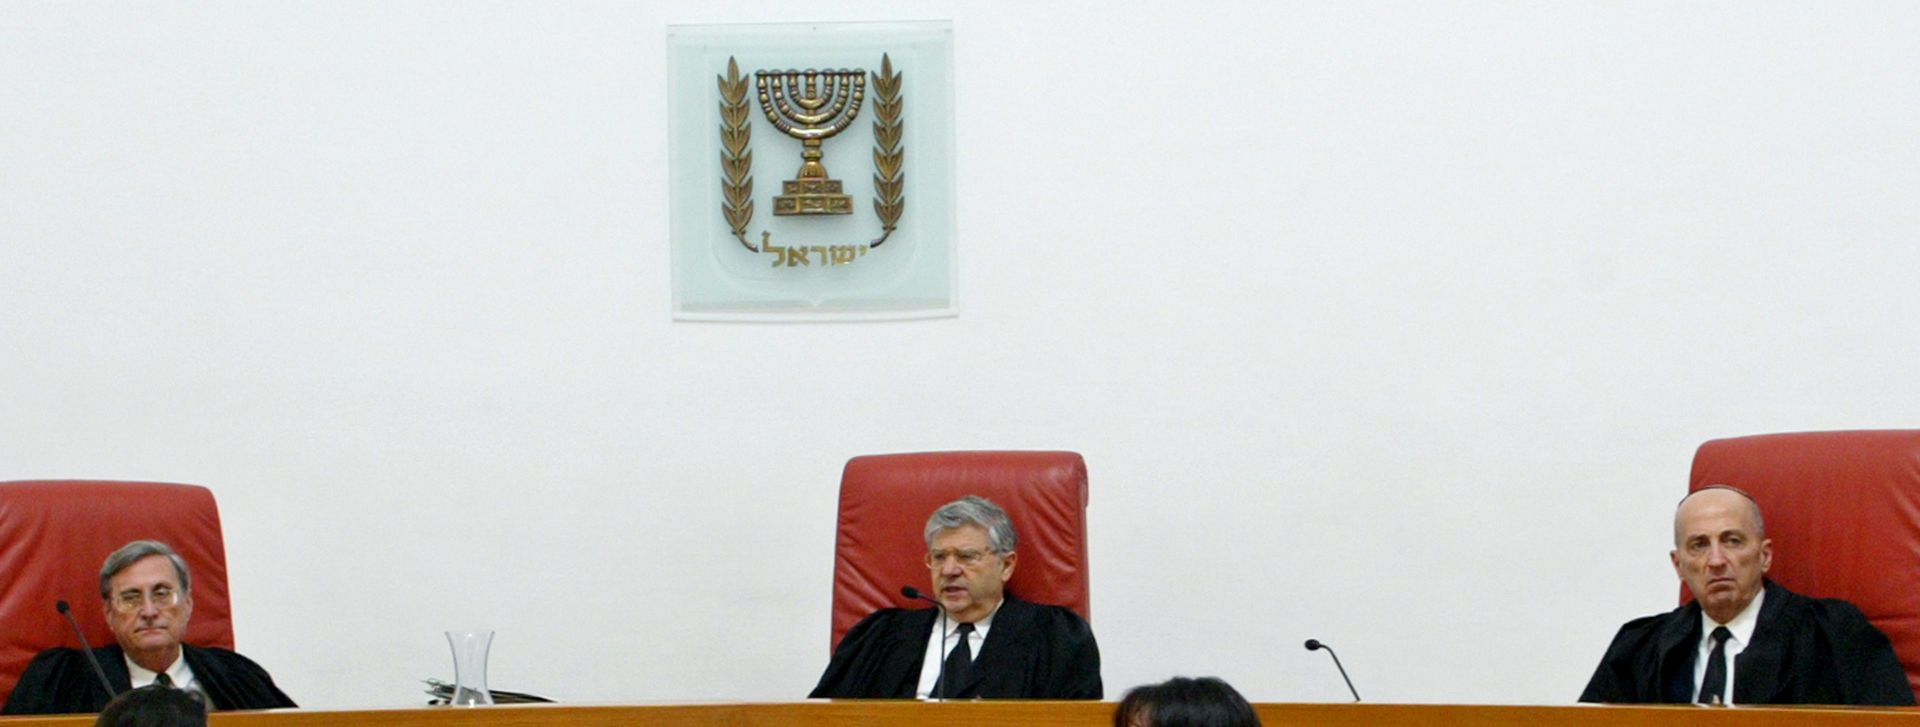 Aharon Barak and Israel’s legal illegality | Opinions